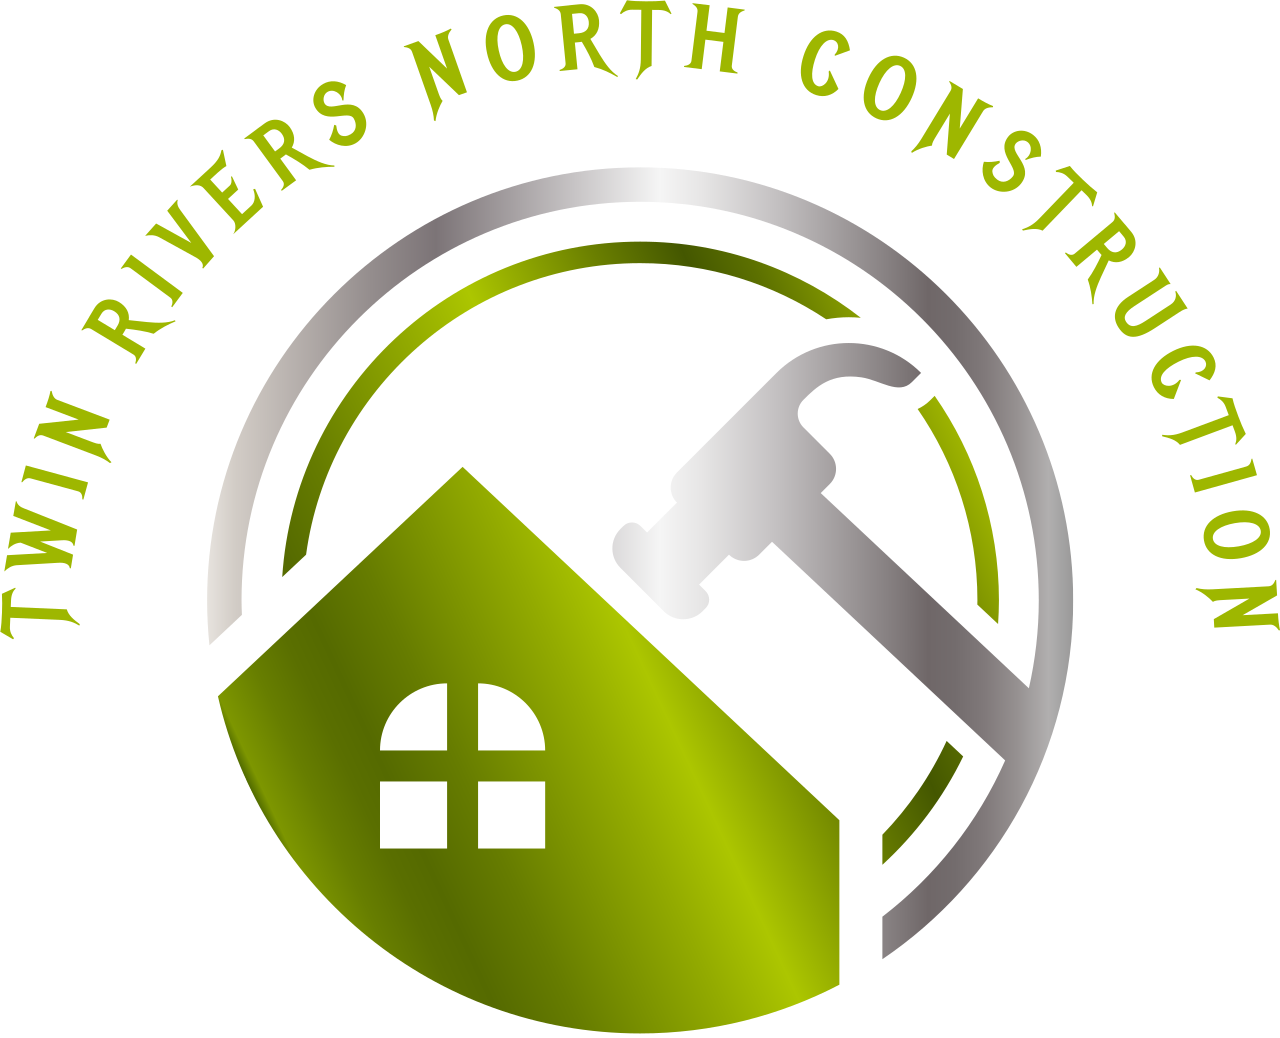 TWIN RIVERS NORTH CONSTRUCTION's logo